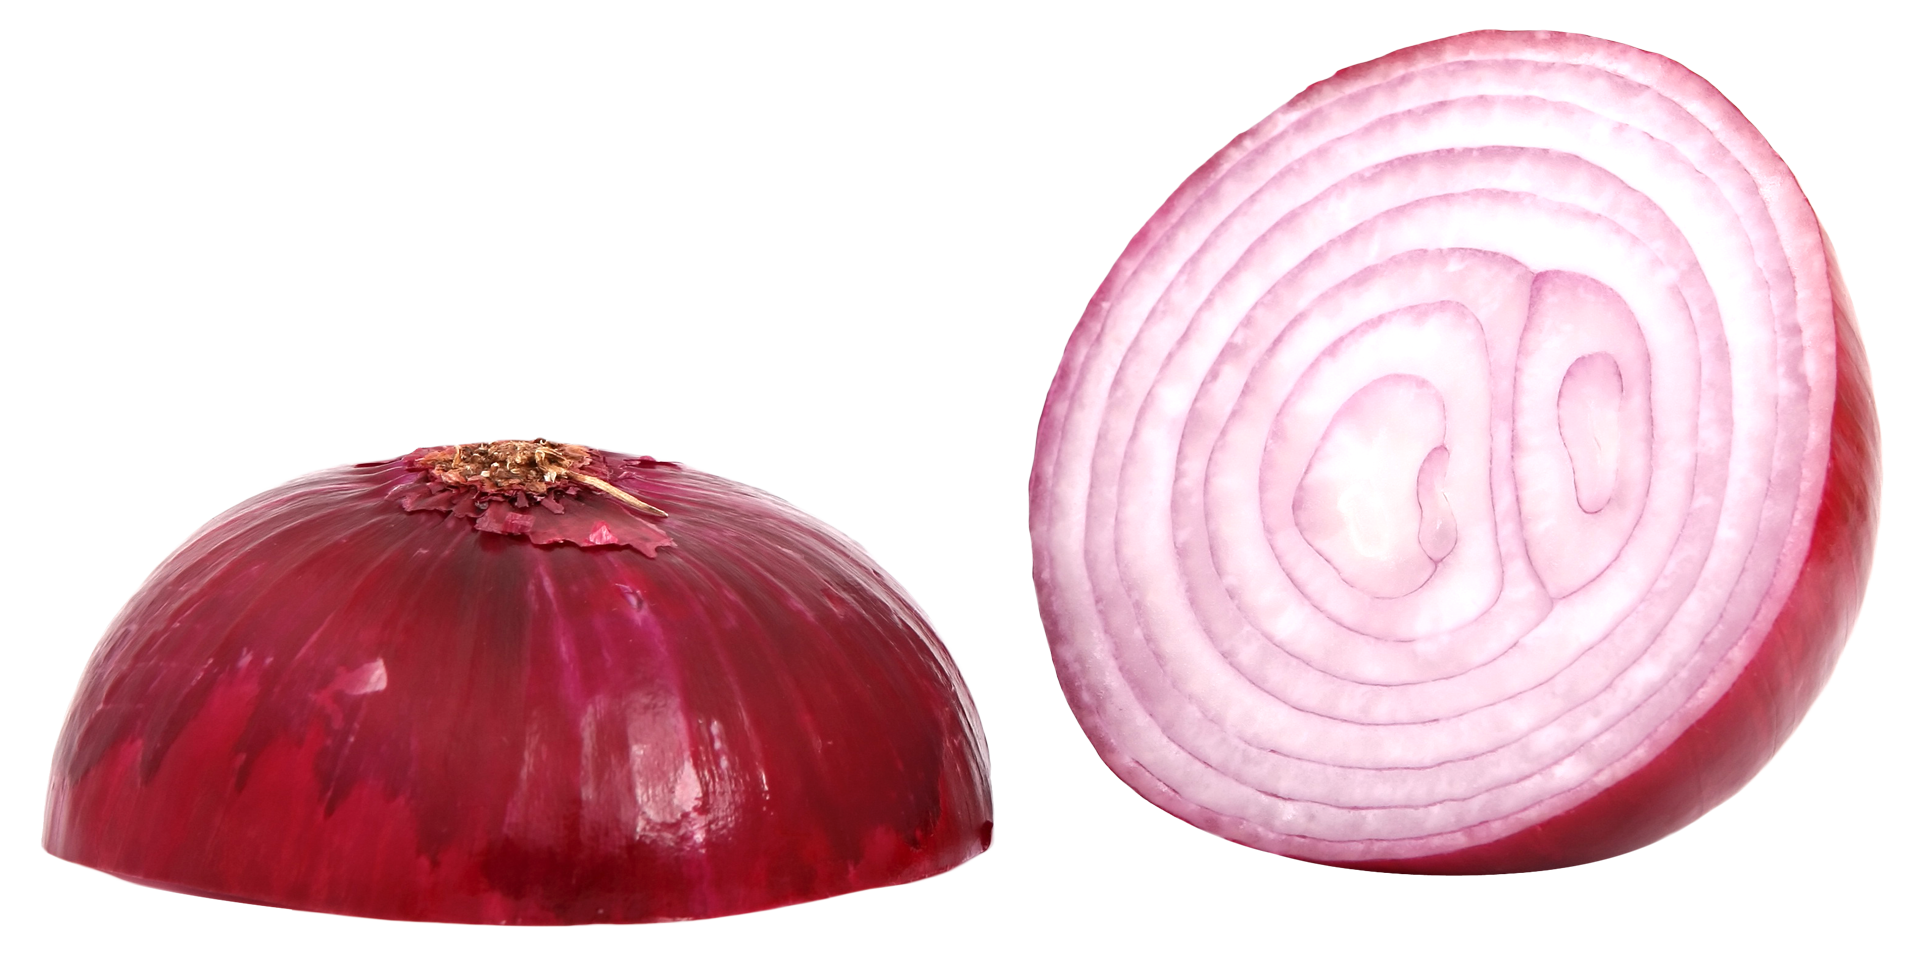 Onion Download PNG Image